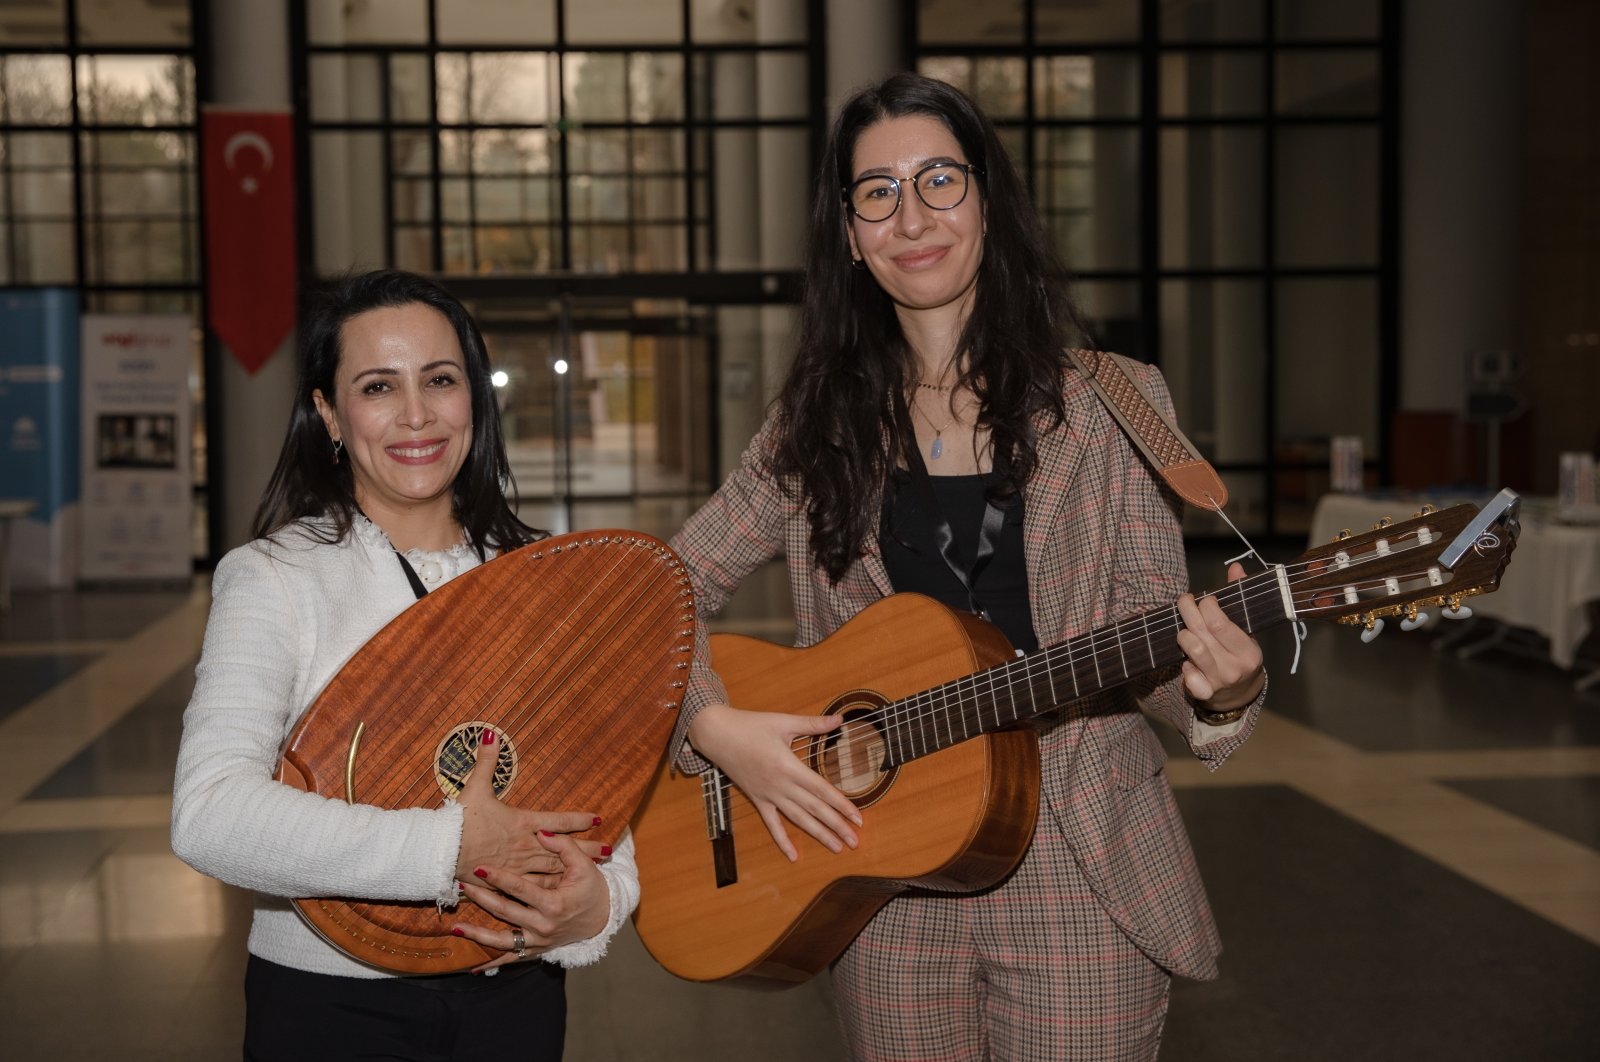 Burçin Uçaner Çifdalöz (R), a faculty member at Ankara Hacı Bayram Veli University Musicology Department and head of the Music Therapy Association, and Yeşim Saltık (L), a music therapist who came to Turkey from the Netherlands to work on the project. (AA Photo)